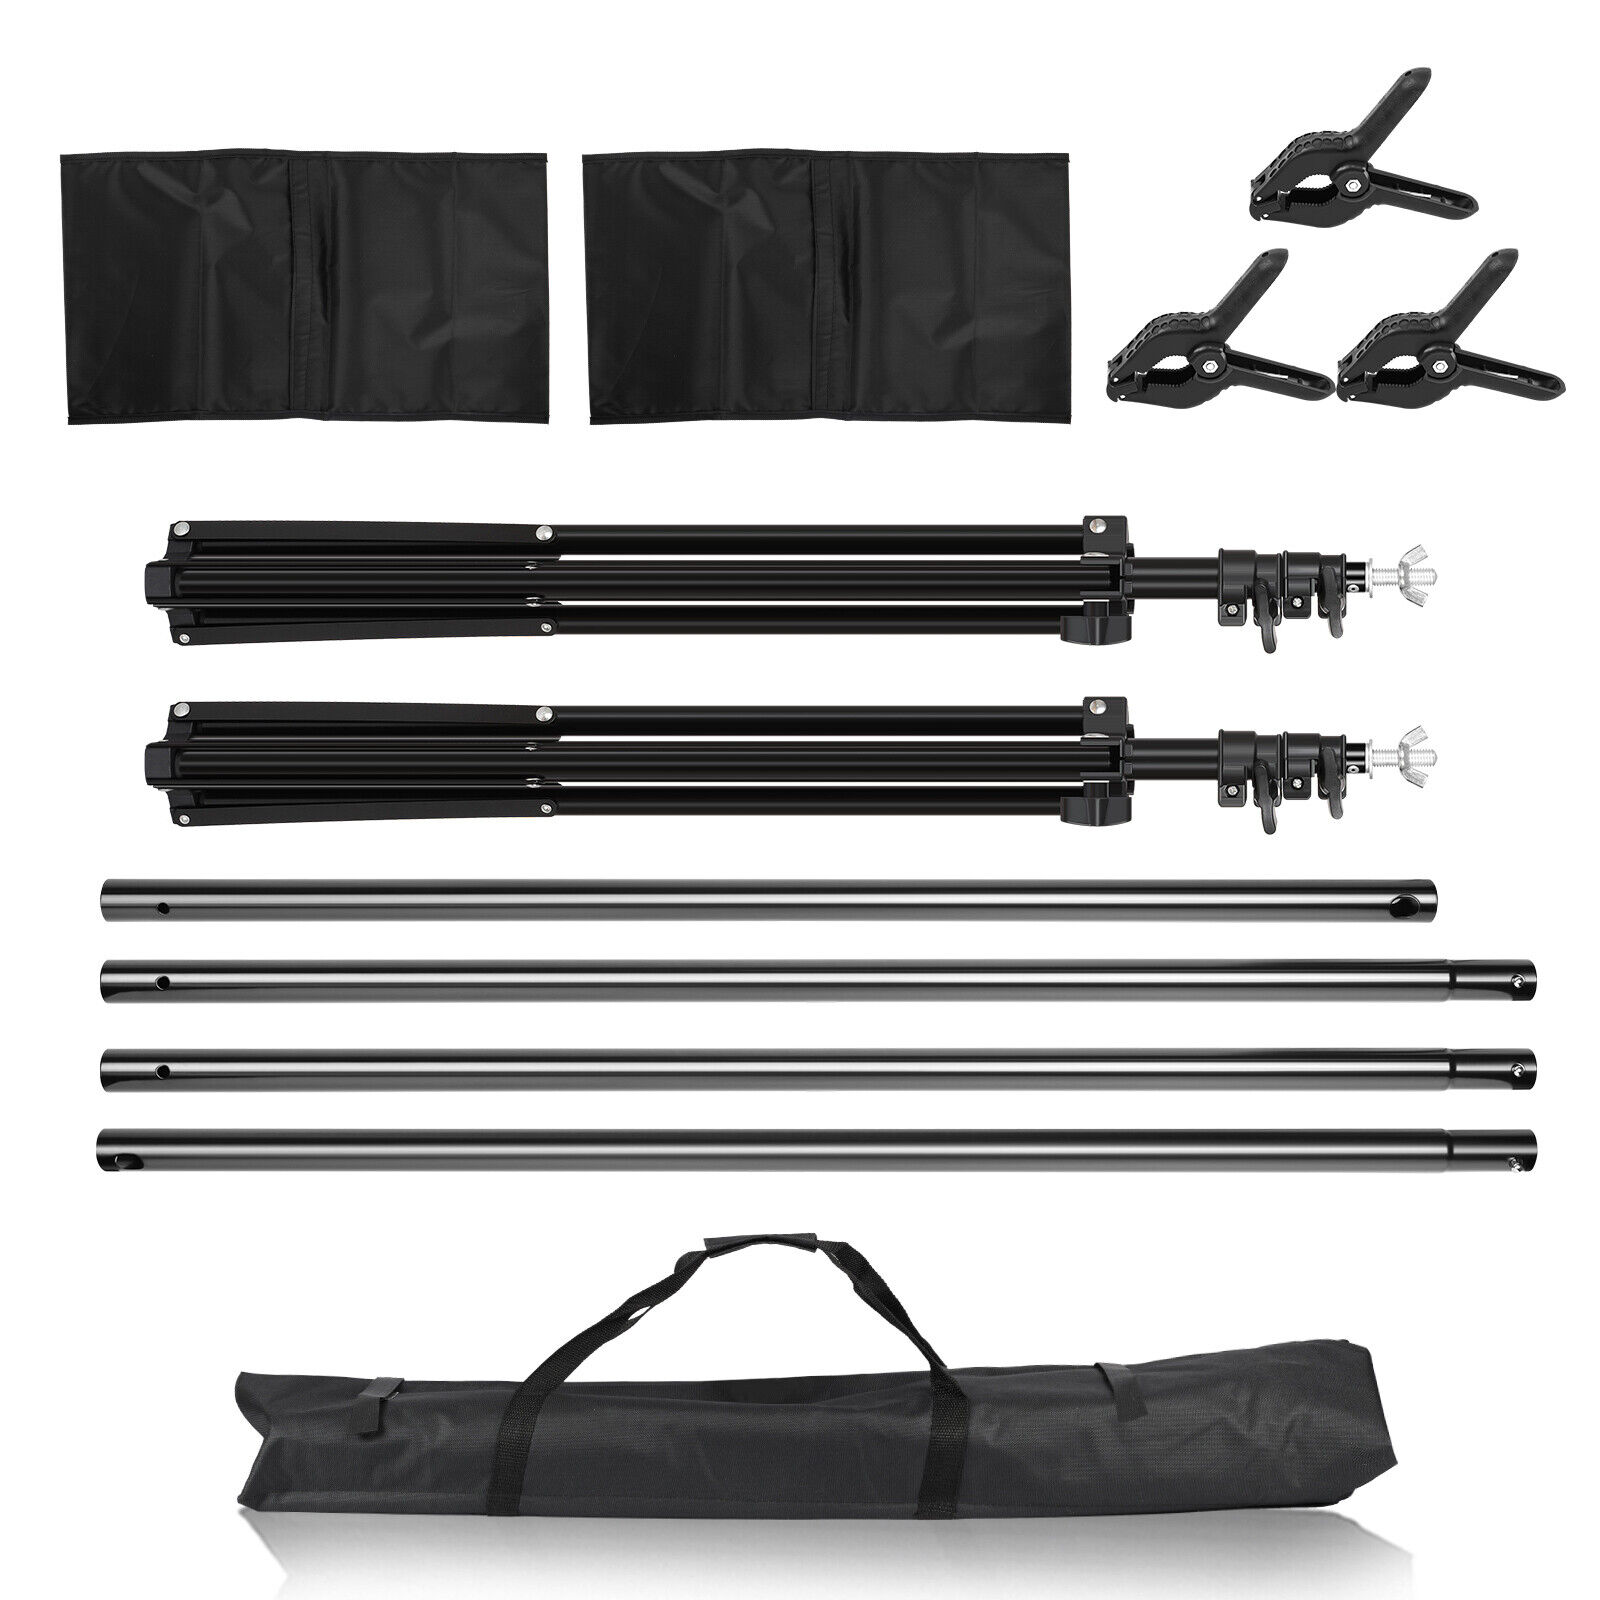 Image 31 - 10ft Heavy Duty Photo Video Studio Backdrop Background Support Stand with Bag